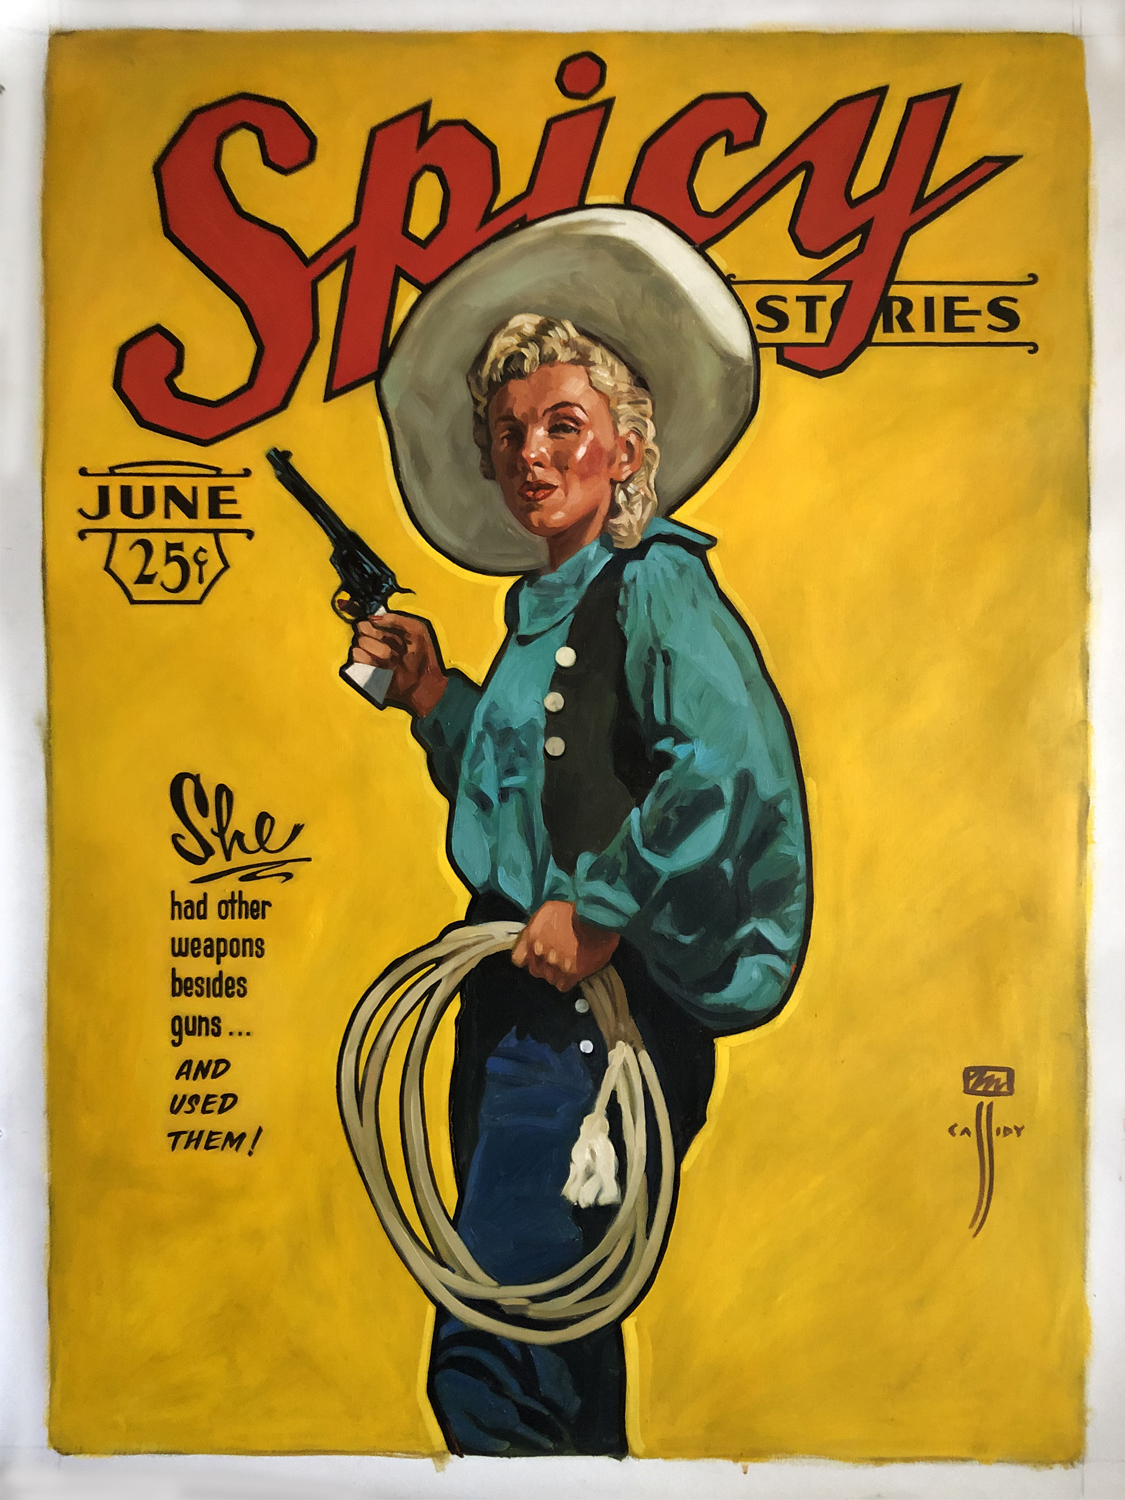 

											Michael Cassidy</b>

											<em>
												Cowboy Stories</em> 

											<h4>
												June 30 - September 30, 2023											</h4>

		                																																													<i>Spicy Stories,</i>  
																																																					oil on linen, 
																																								70 x 48 inches 
																								
		                				